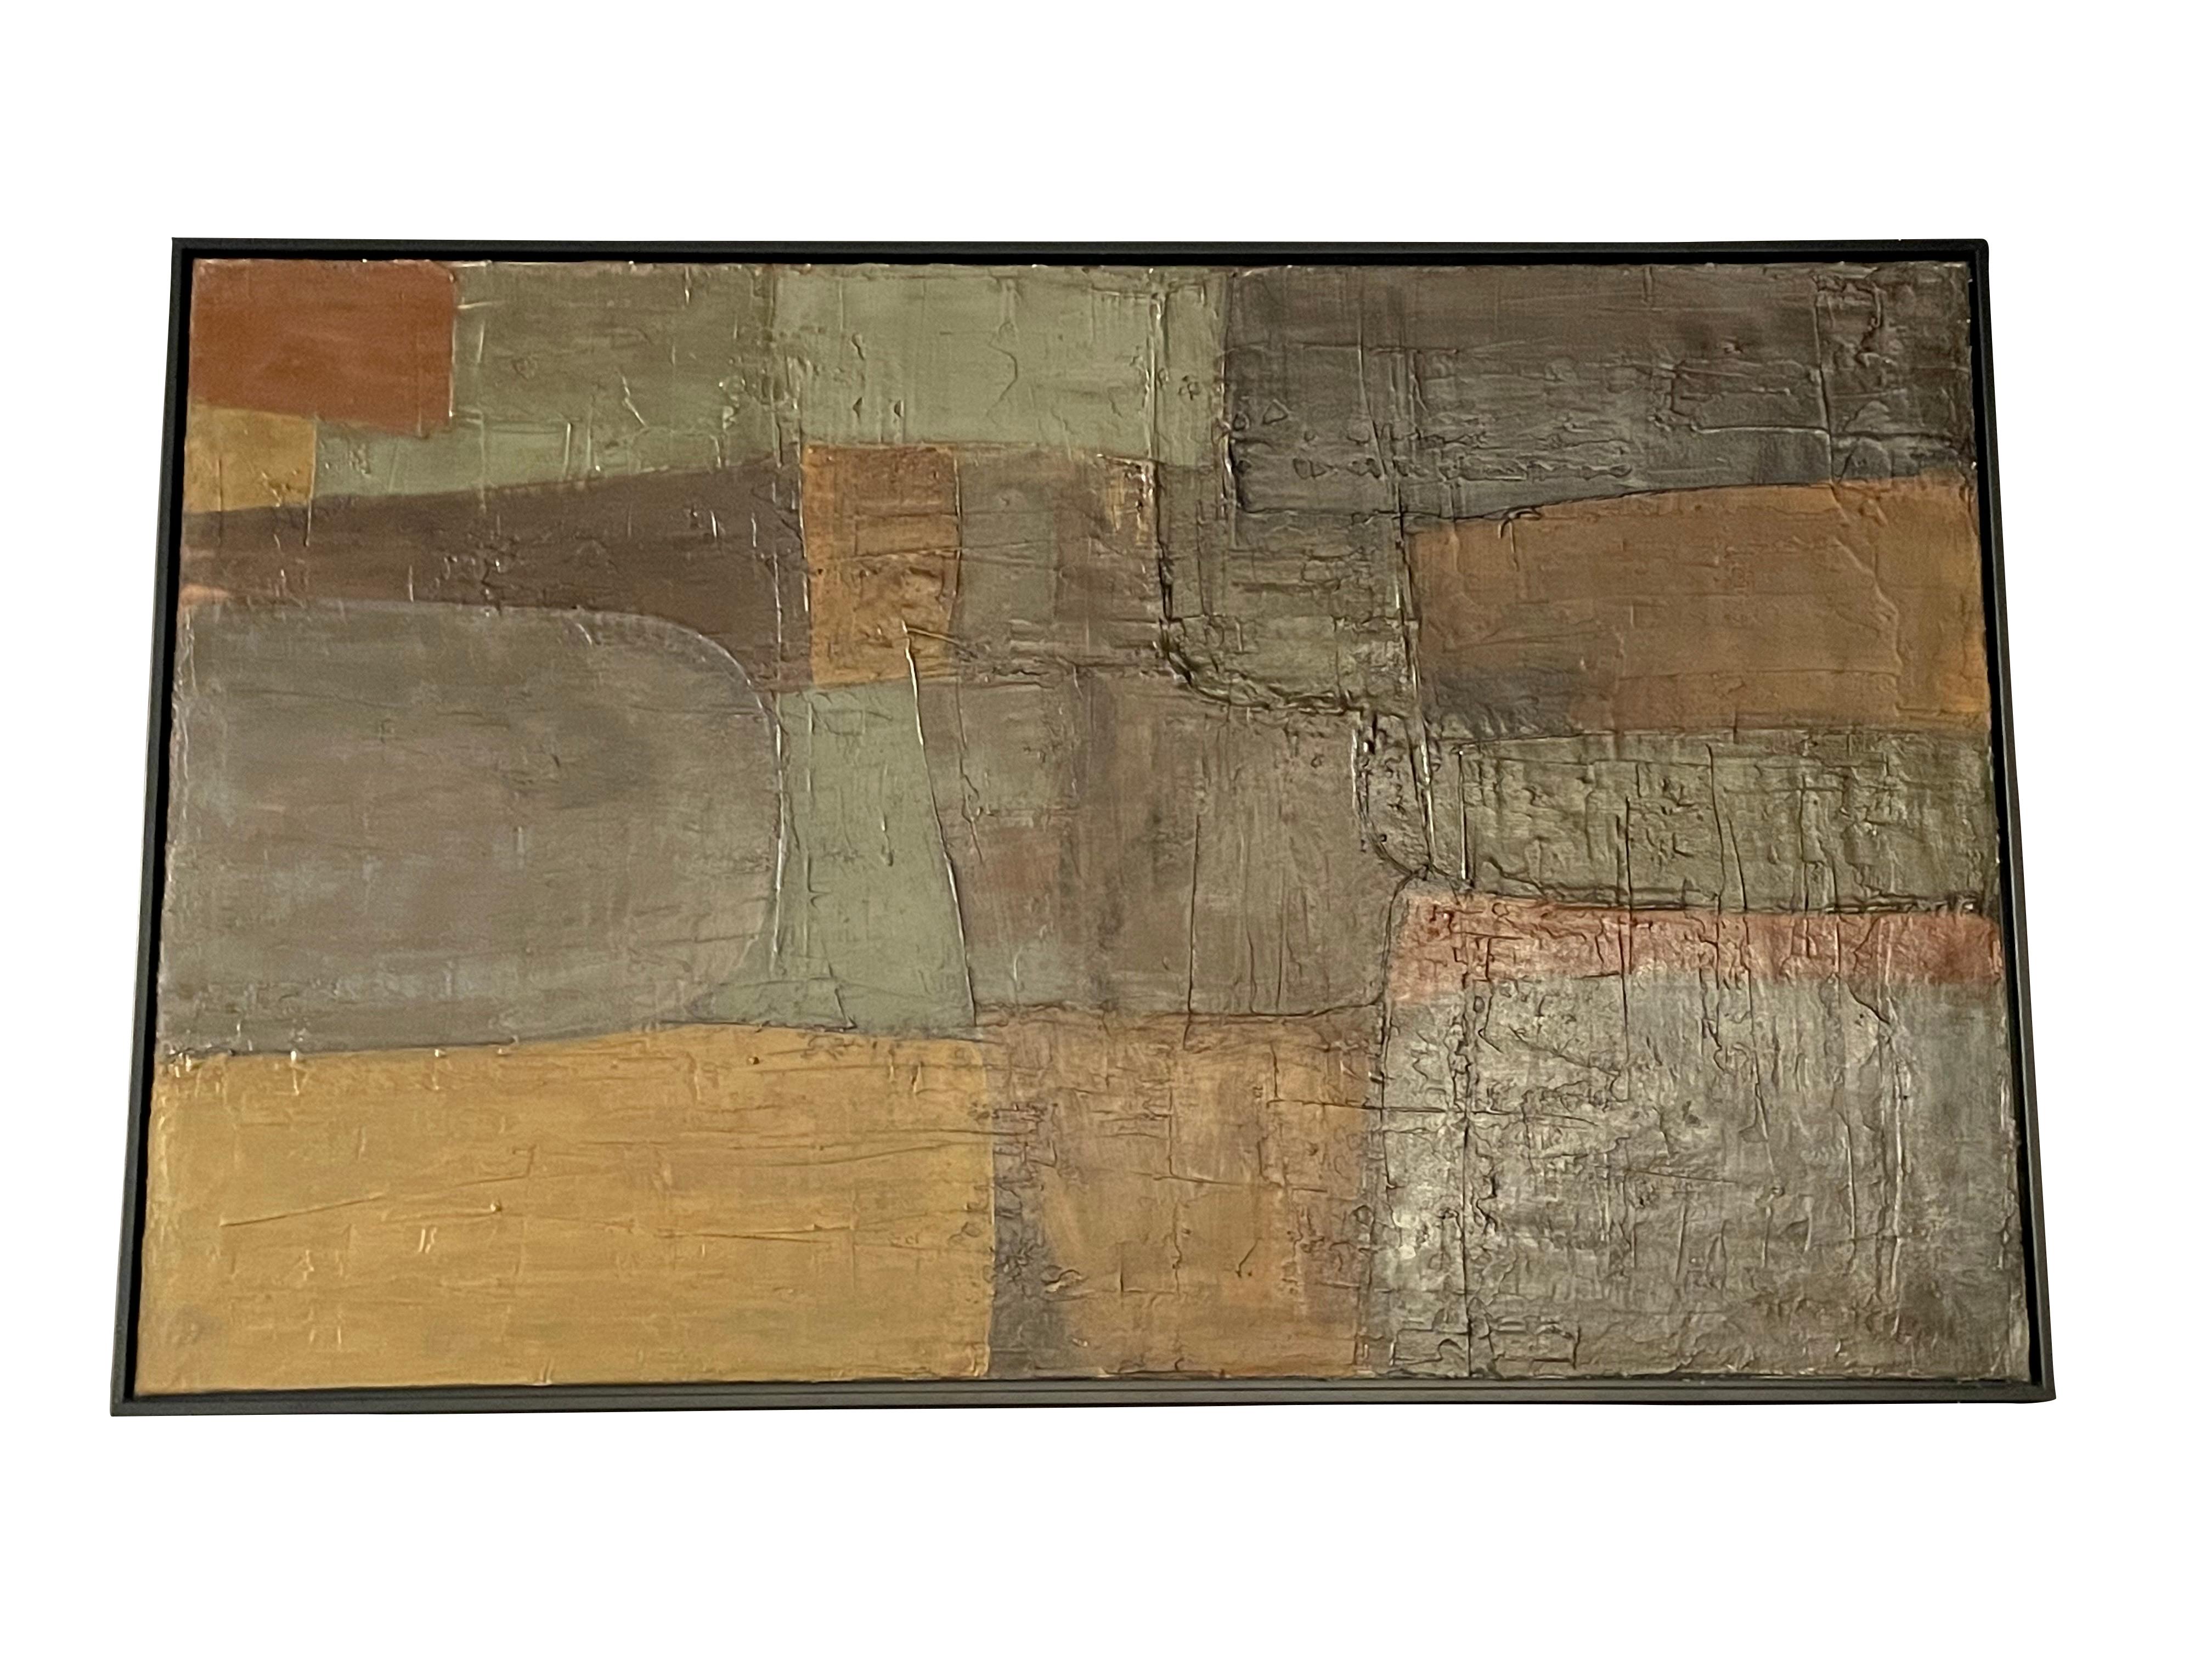 Shades of green, gold and rust contemporary painting by Spanish artist Santiago Castillo.
This large painting is created in oil and stucco on wood. The stucco and a combination of matte and gloss paint finish create an interesting textural